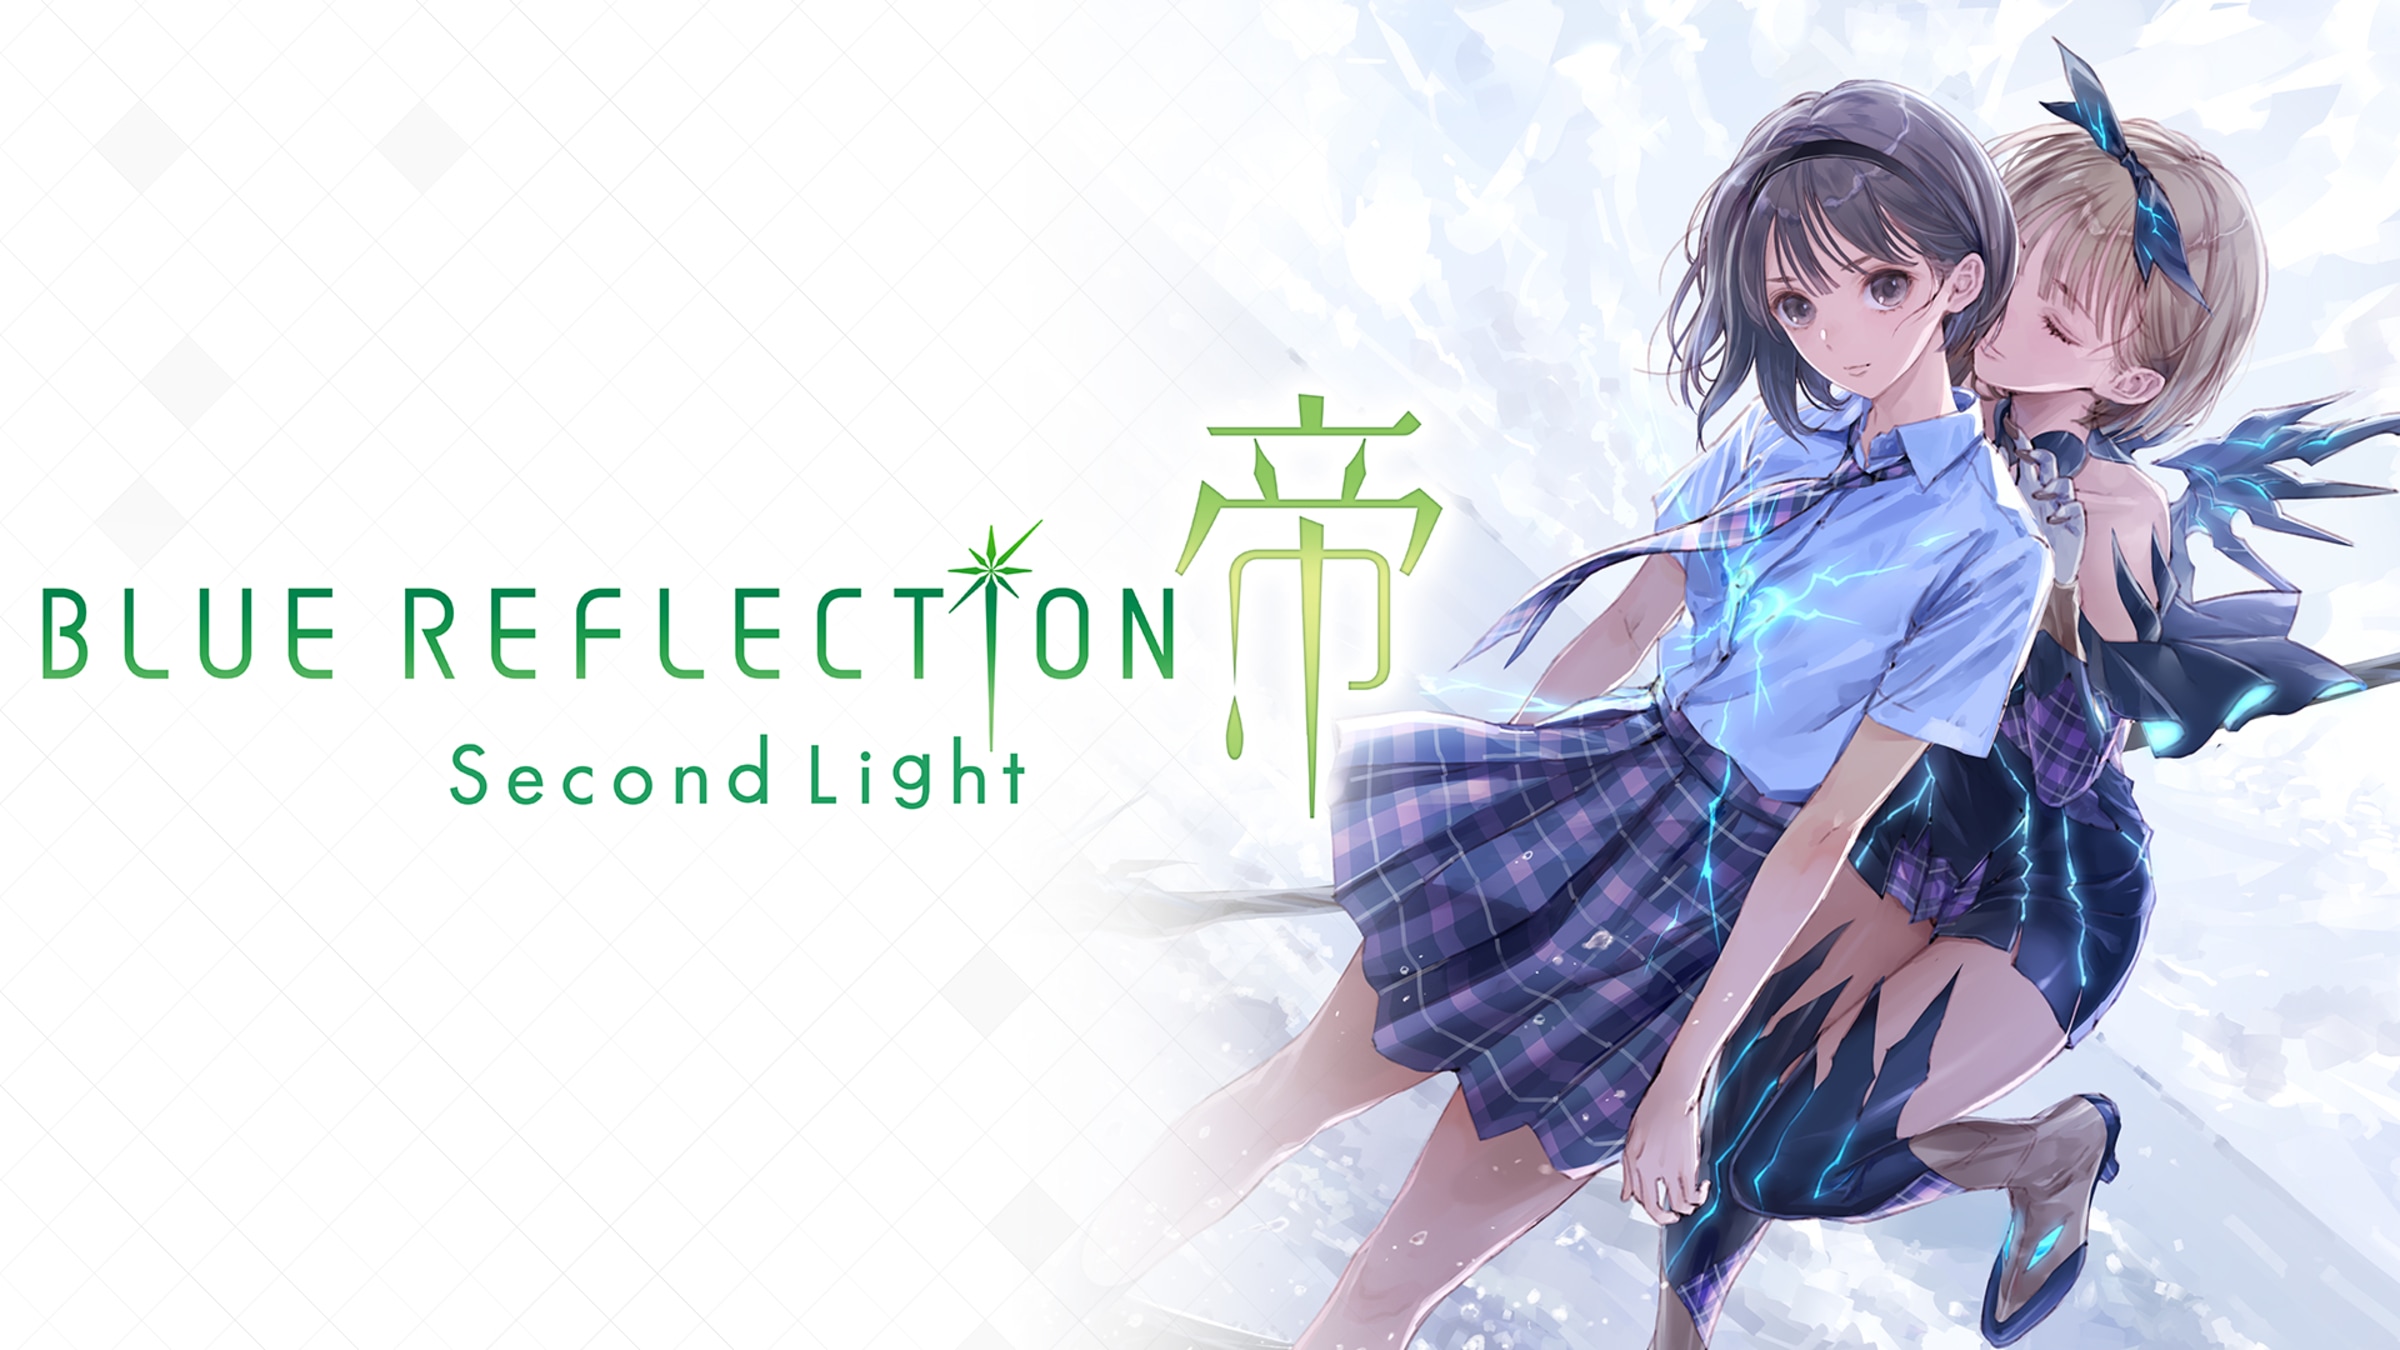 Blue Reflection: Second Light - wide 3